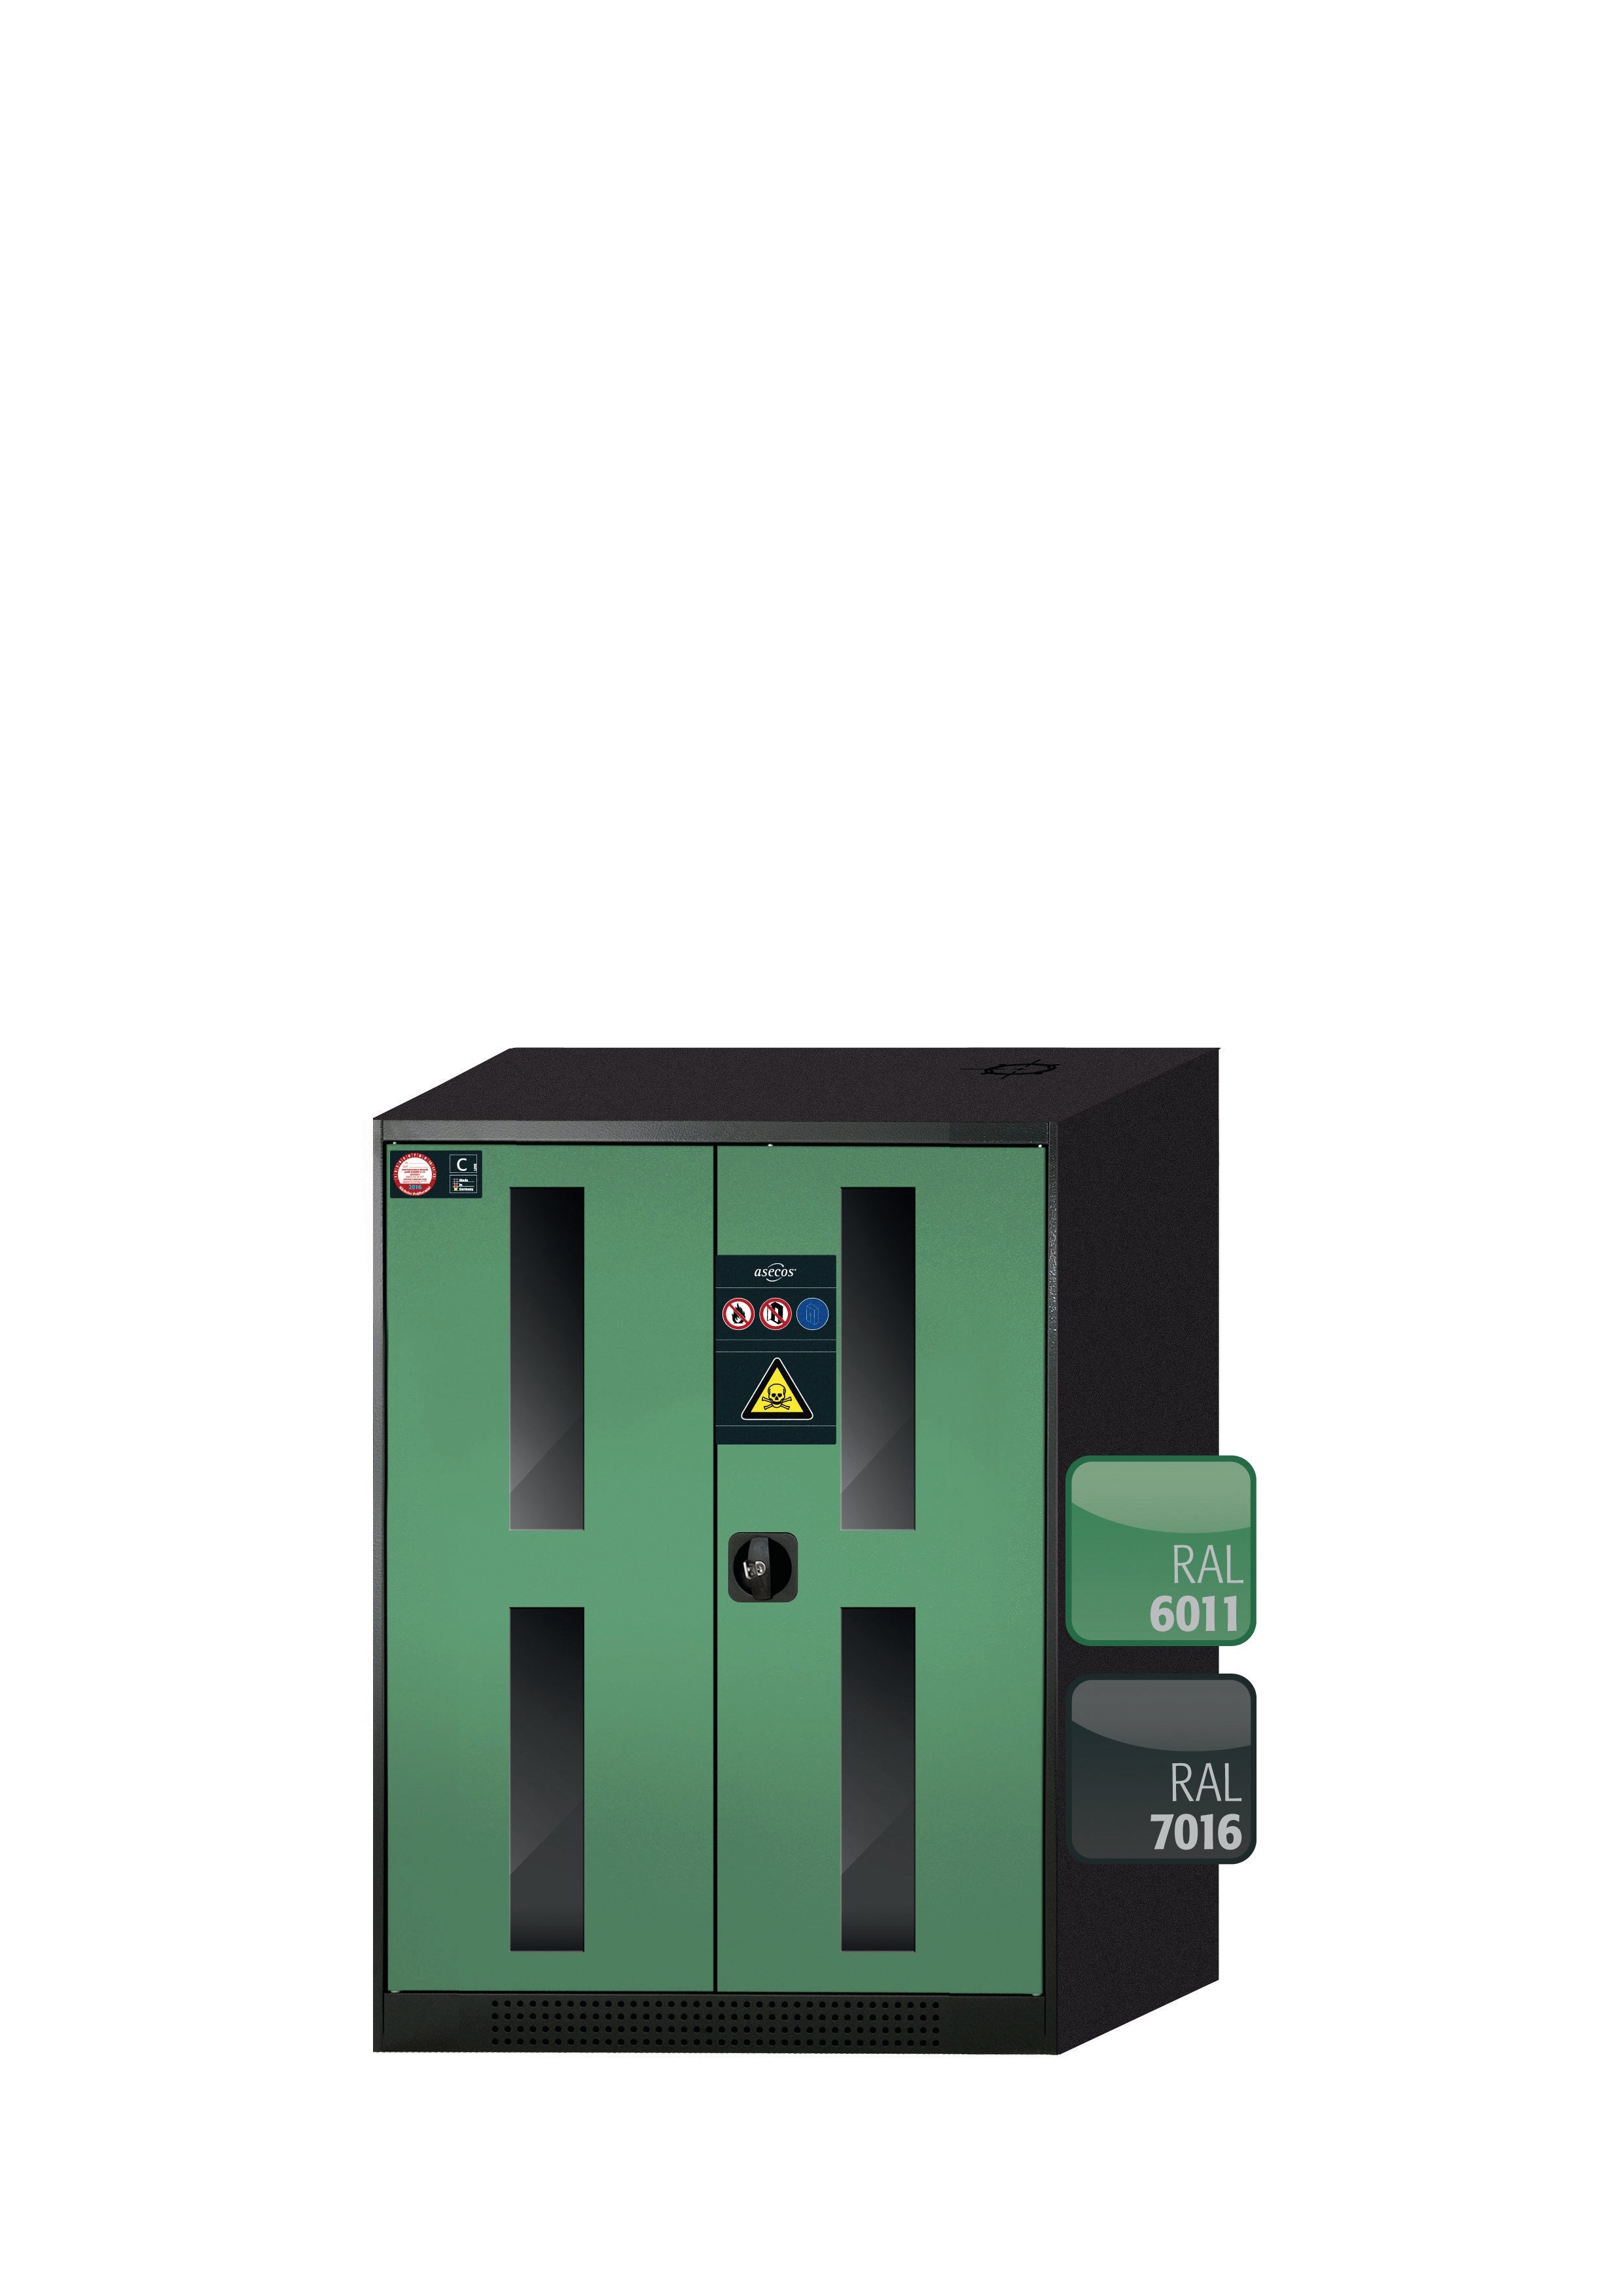 Chemical cabinet CS-CLASSIC-G model CS.110.081.WDFW in reseda green RAL 6011 with 2x AbZ shelf pull-out (sheet steel/polypropylene)